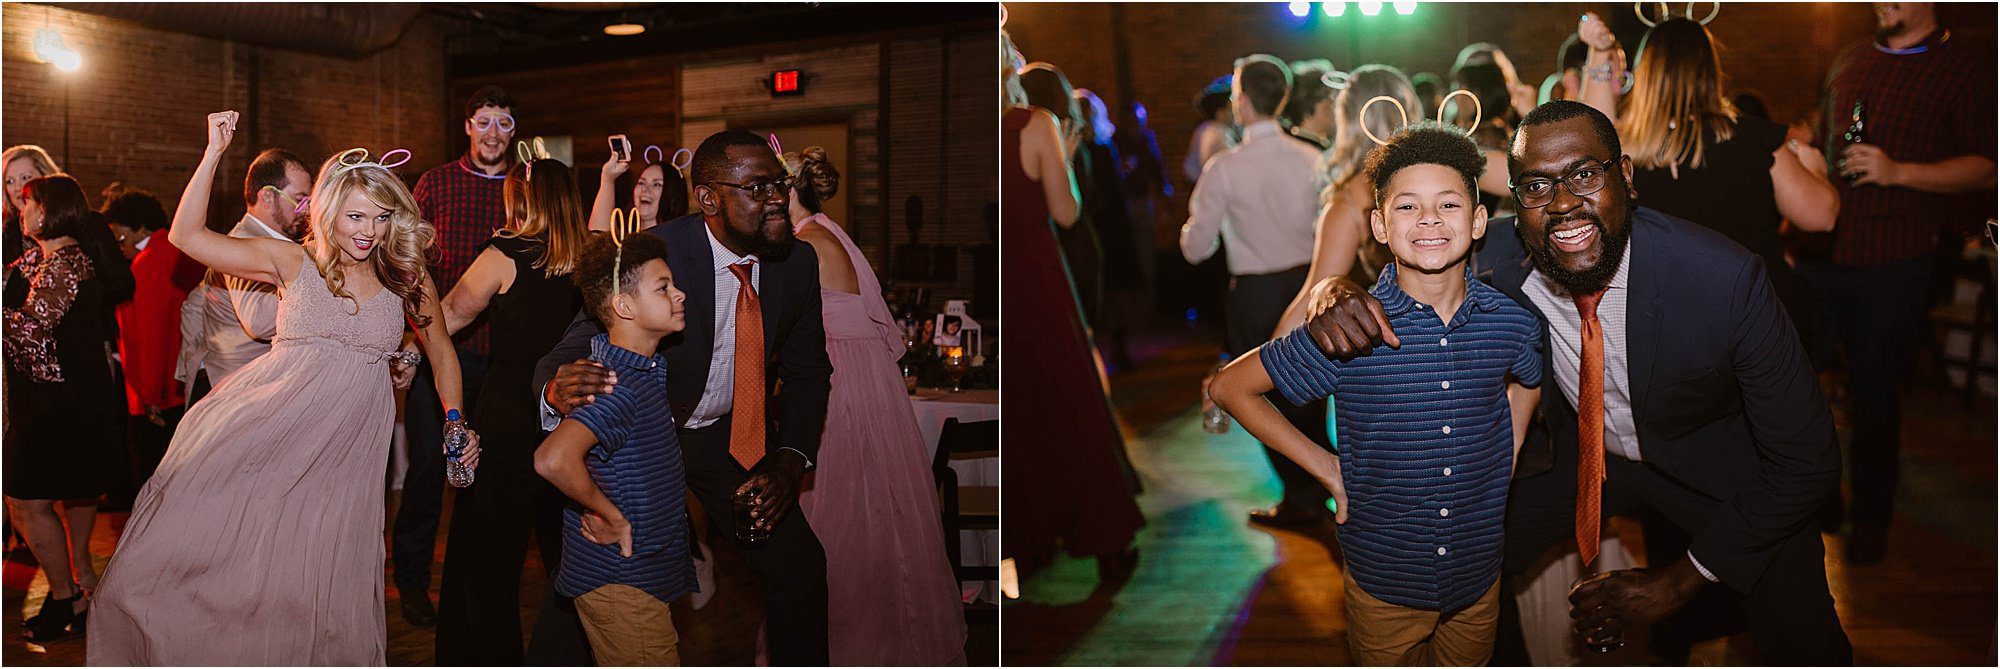 wedding reception photos at The Standard Knoxville